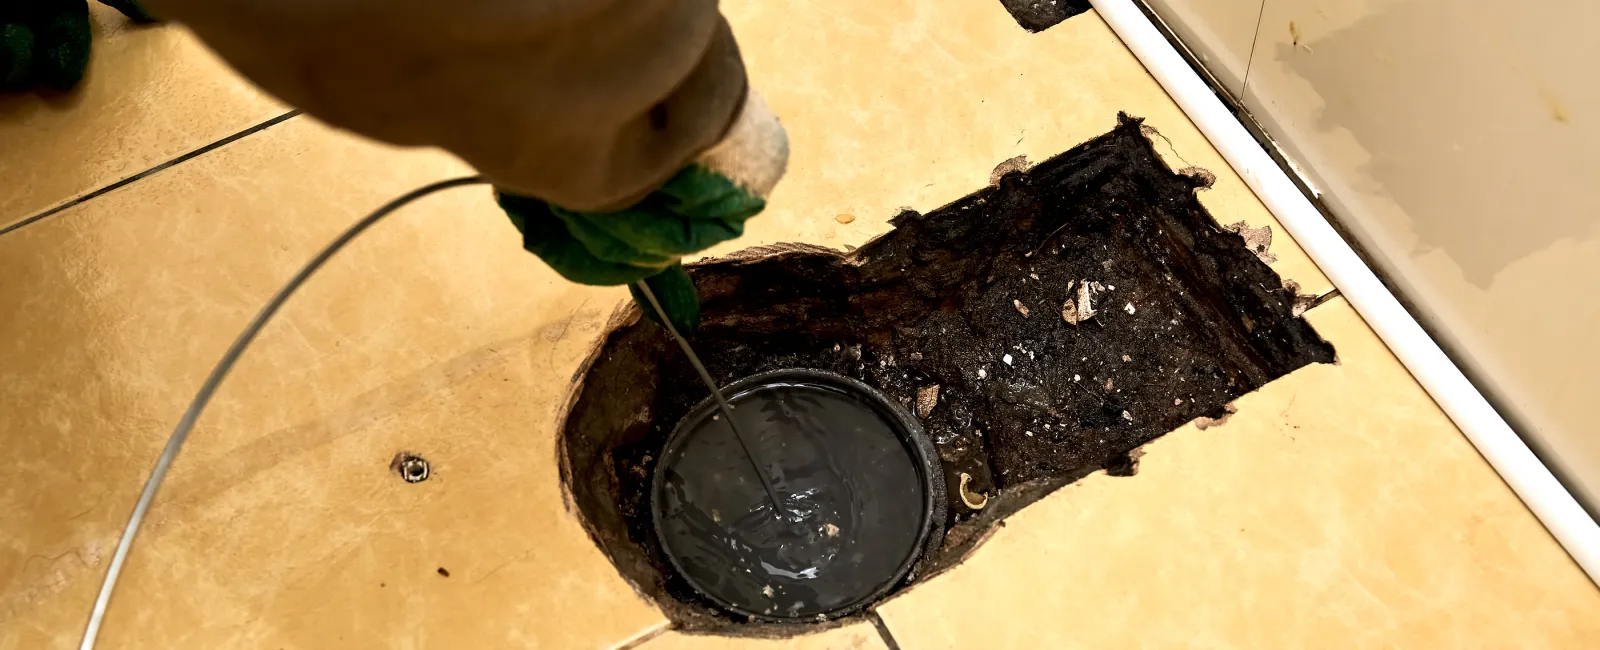 DIY Sewer Drain Cleaning and Why it's a Bad Idea